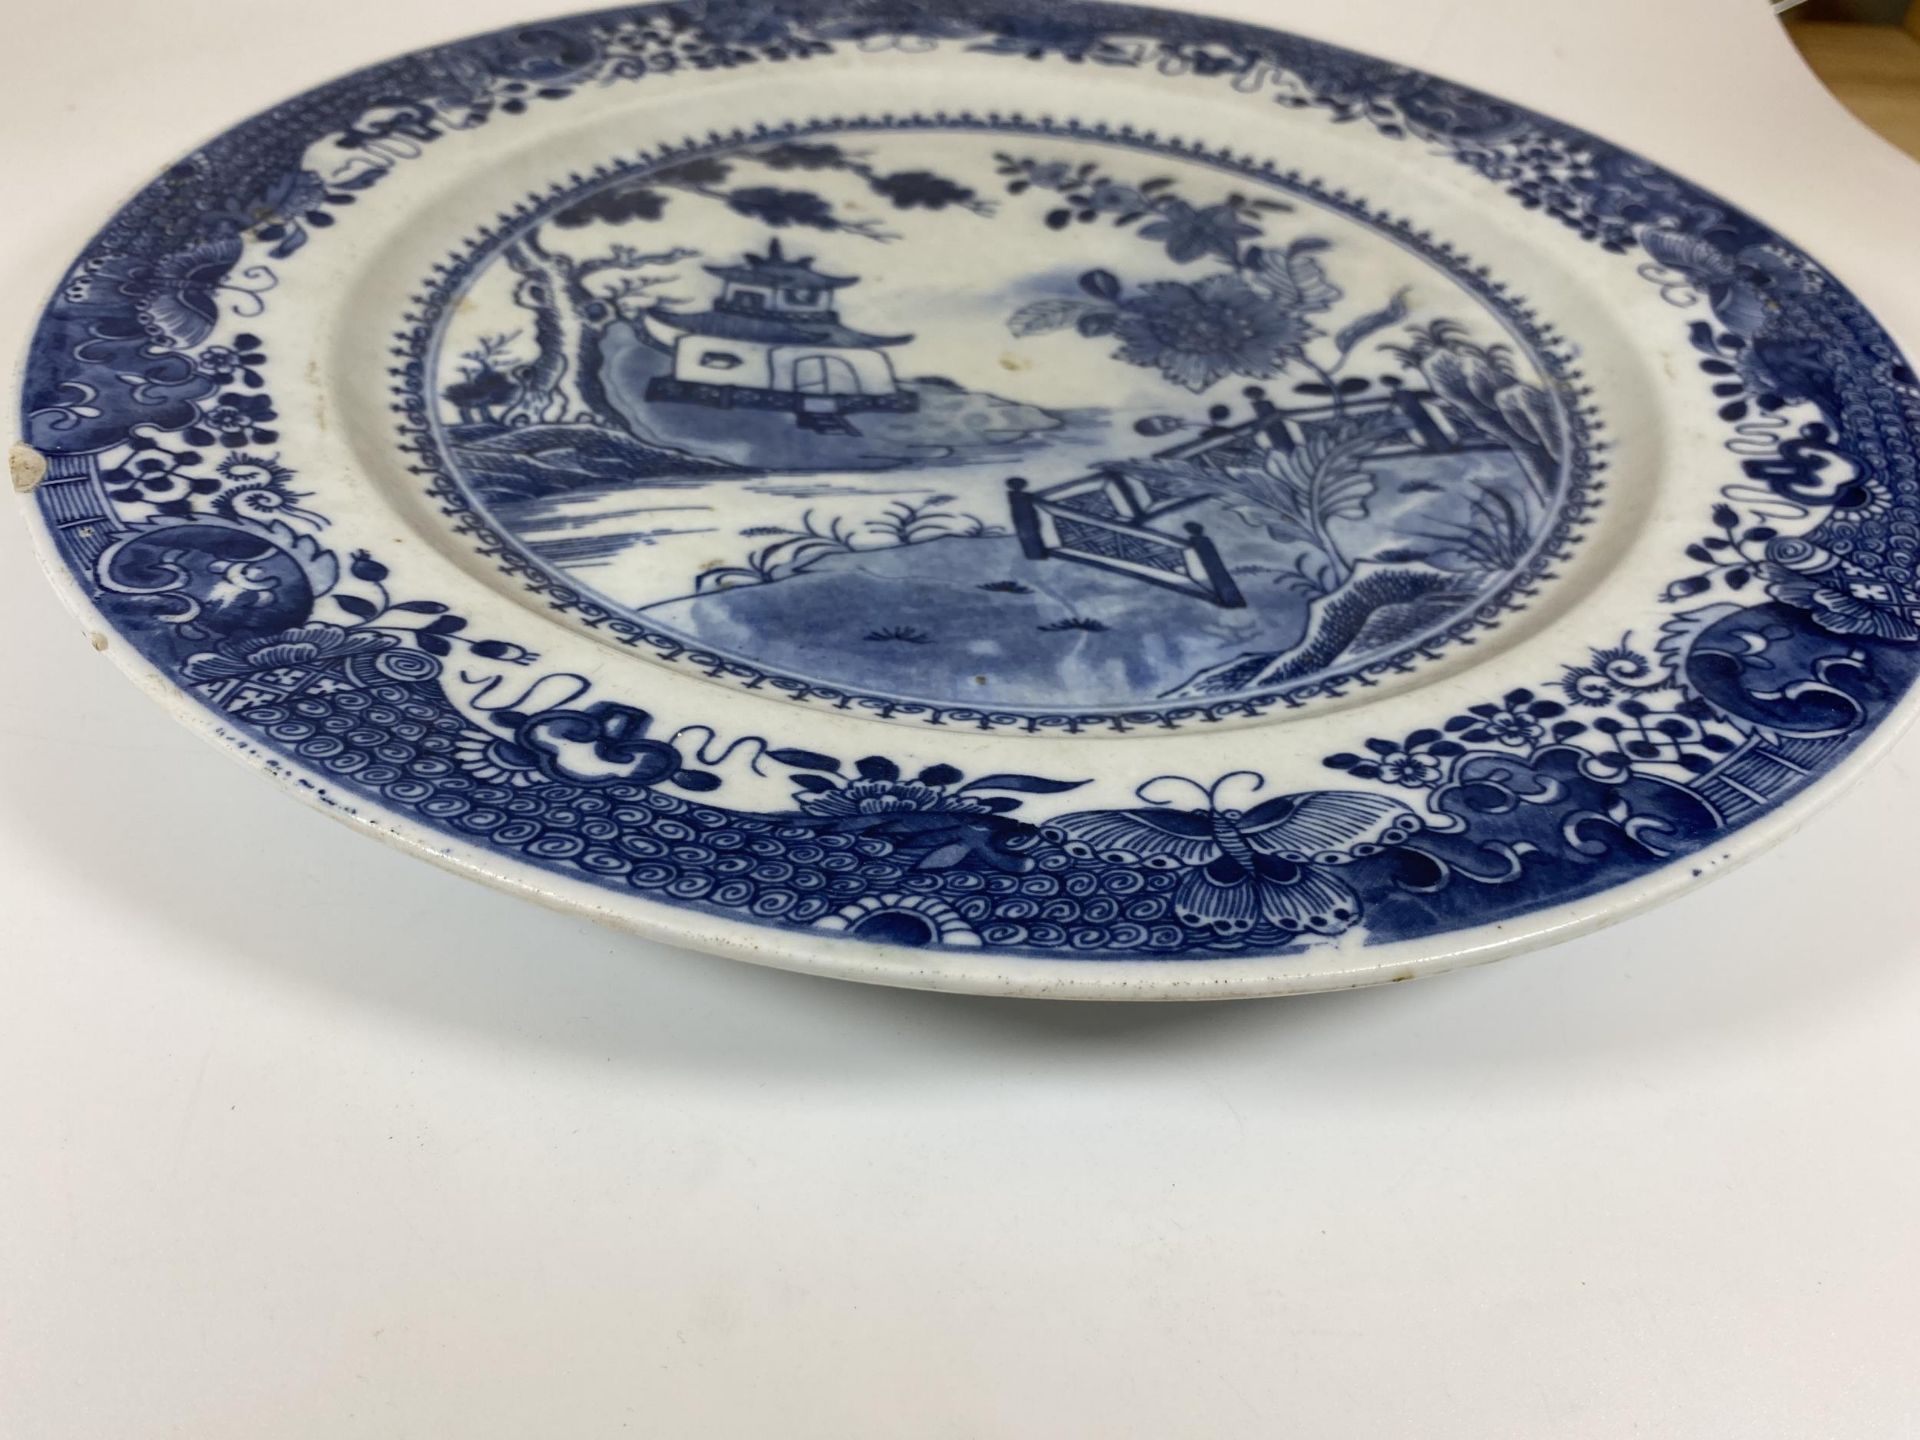 A LARGE CHINESE BLUE AND WHITE CHARGER WITH PAGODA LANDSCAPE DESIGN, DIAMETER 35CM - Image 3 of 6